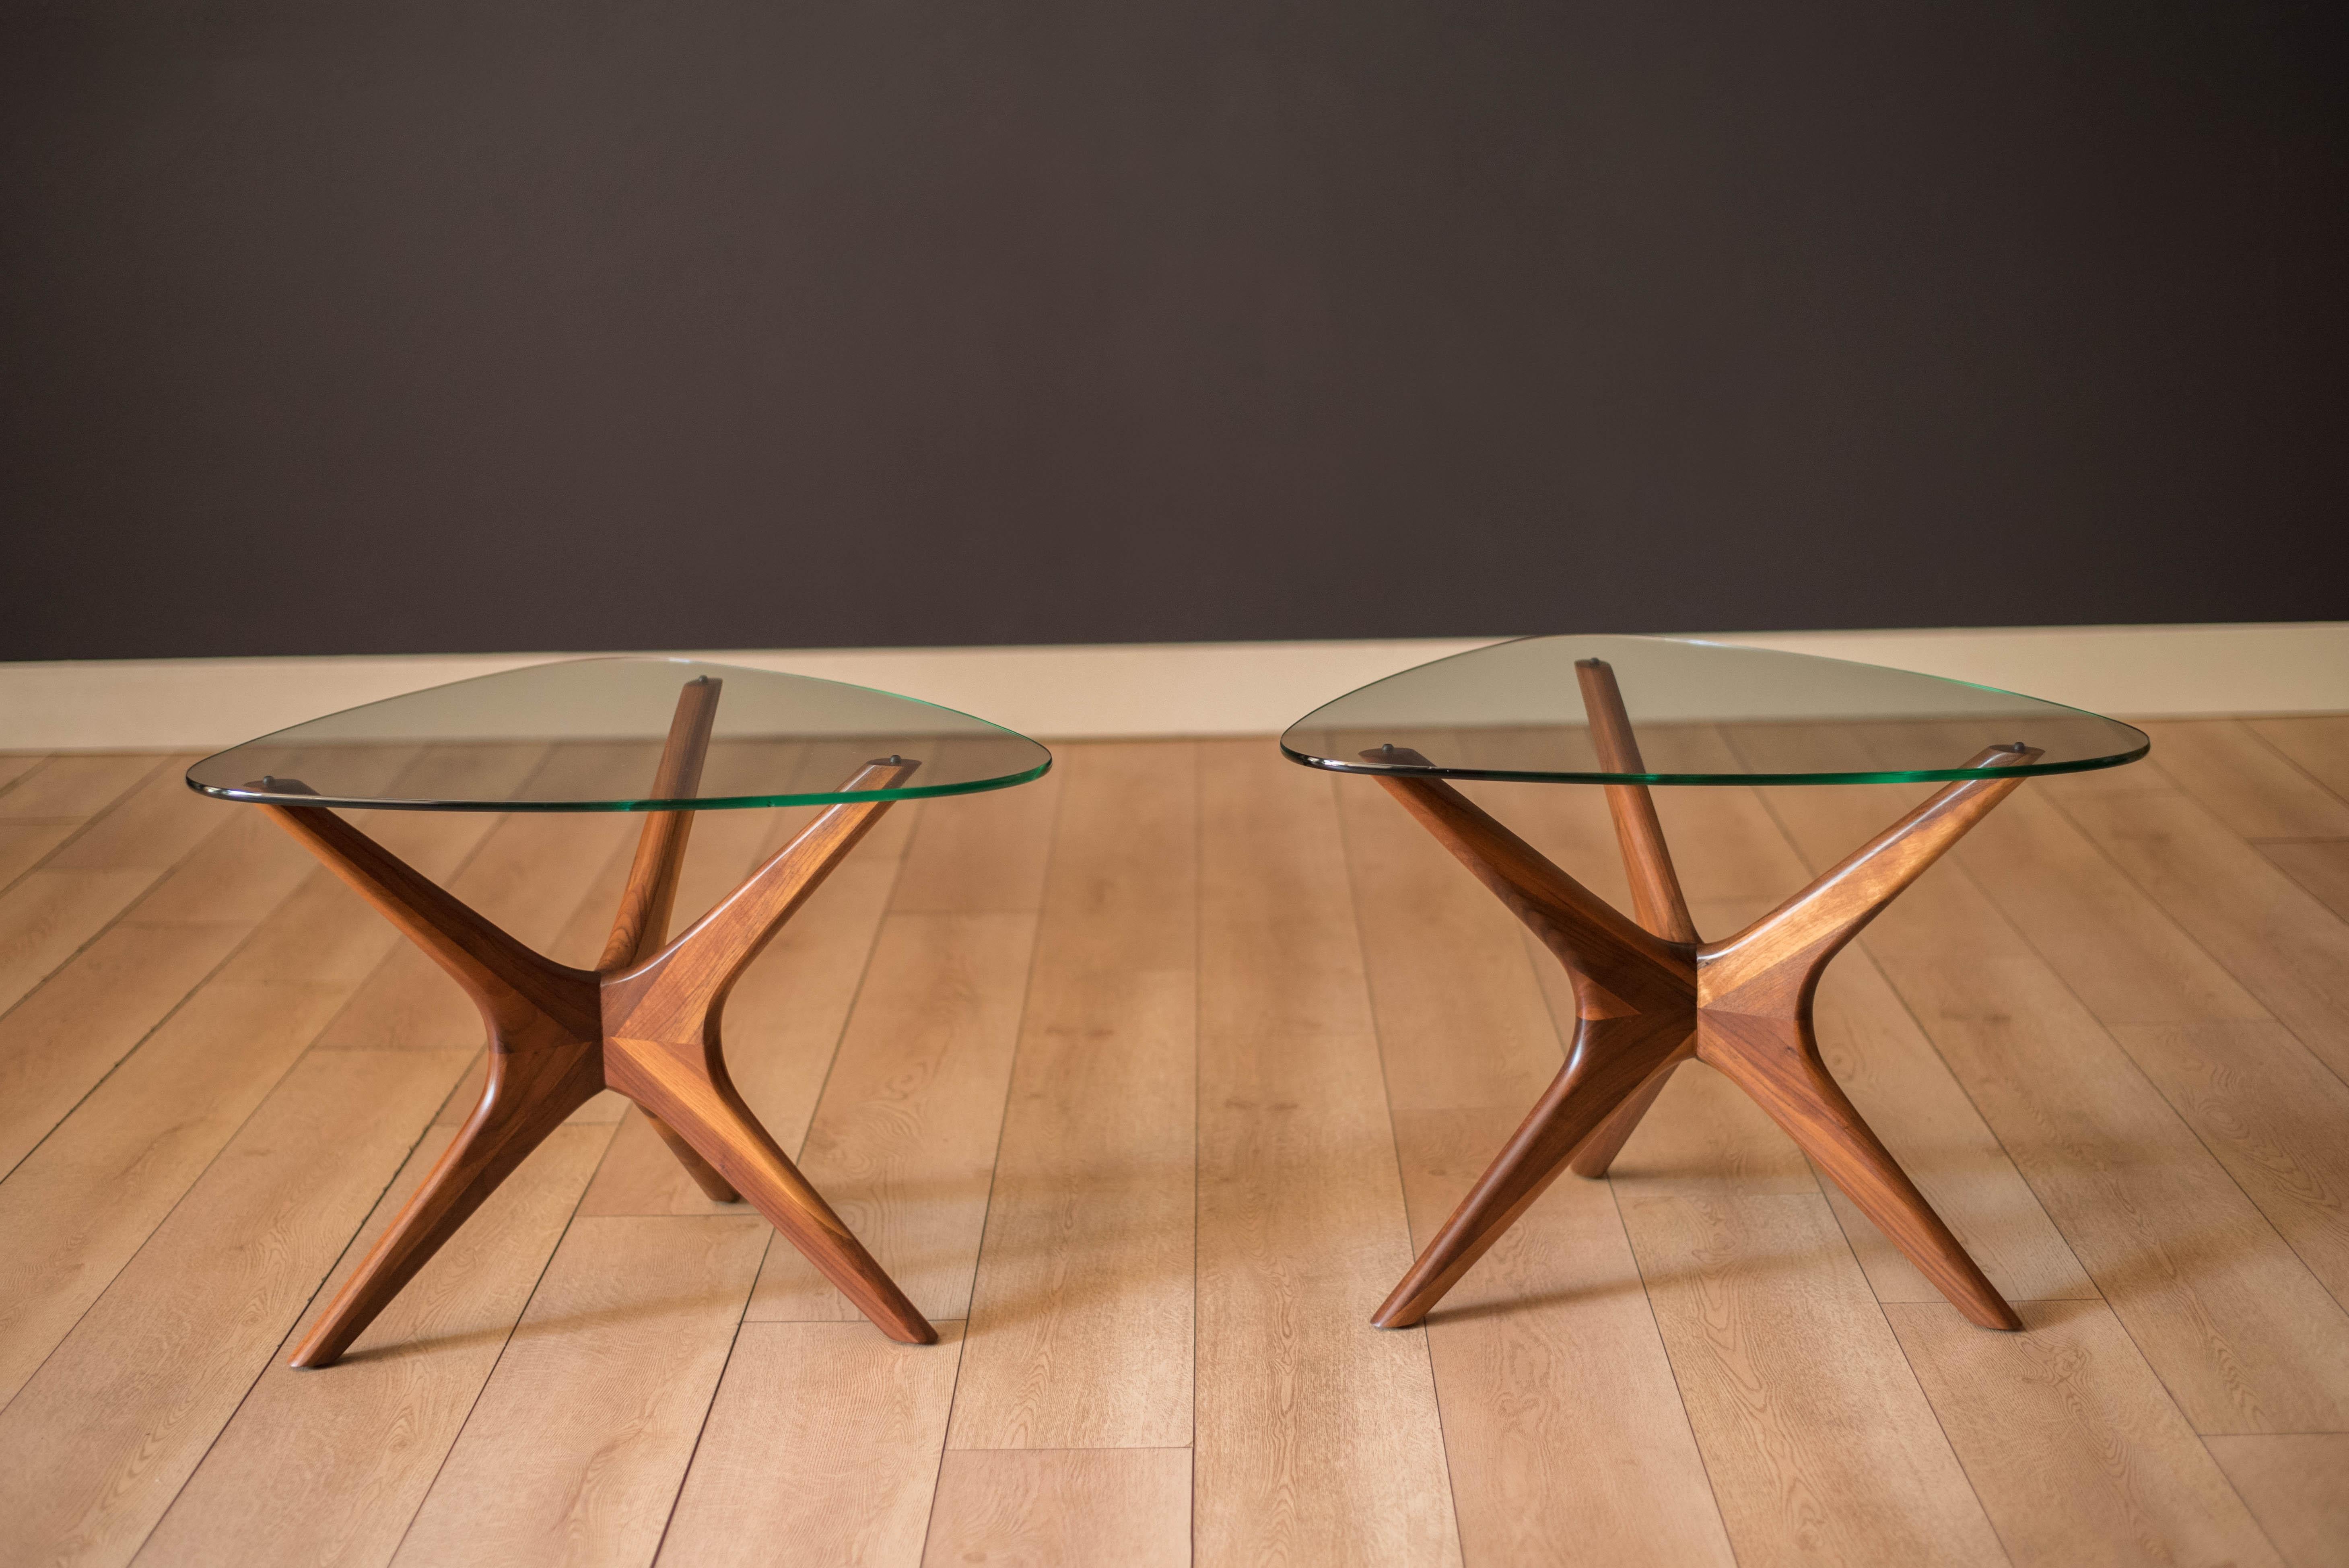 Mid-Century Modern pair of side tables designed by Adrian Pearsall for Craft Associates, circa 1960s. The supporting base is made of sculptural solid walnut with a curved triangular glass top. Price is for the pair. The matching coffee table is